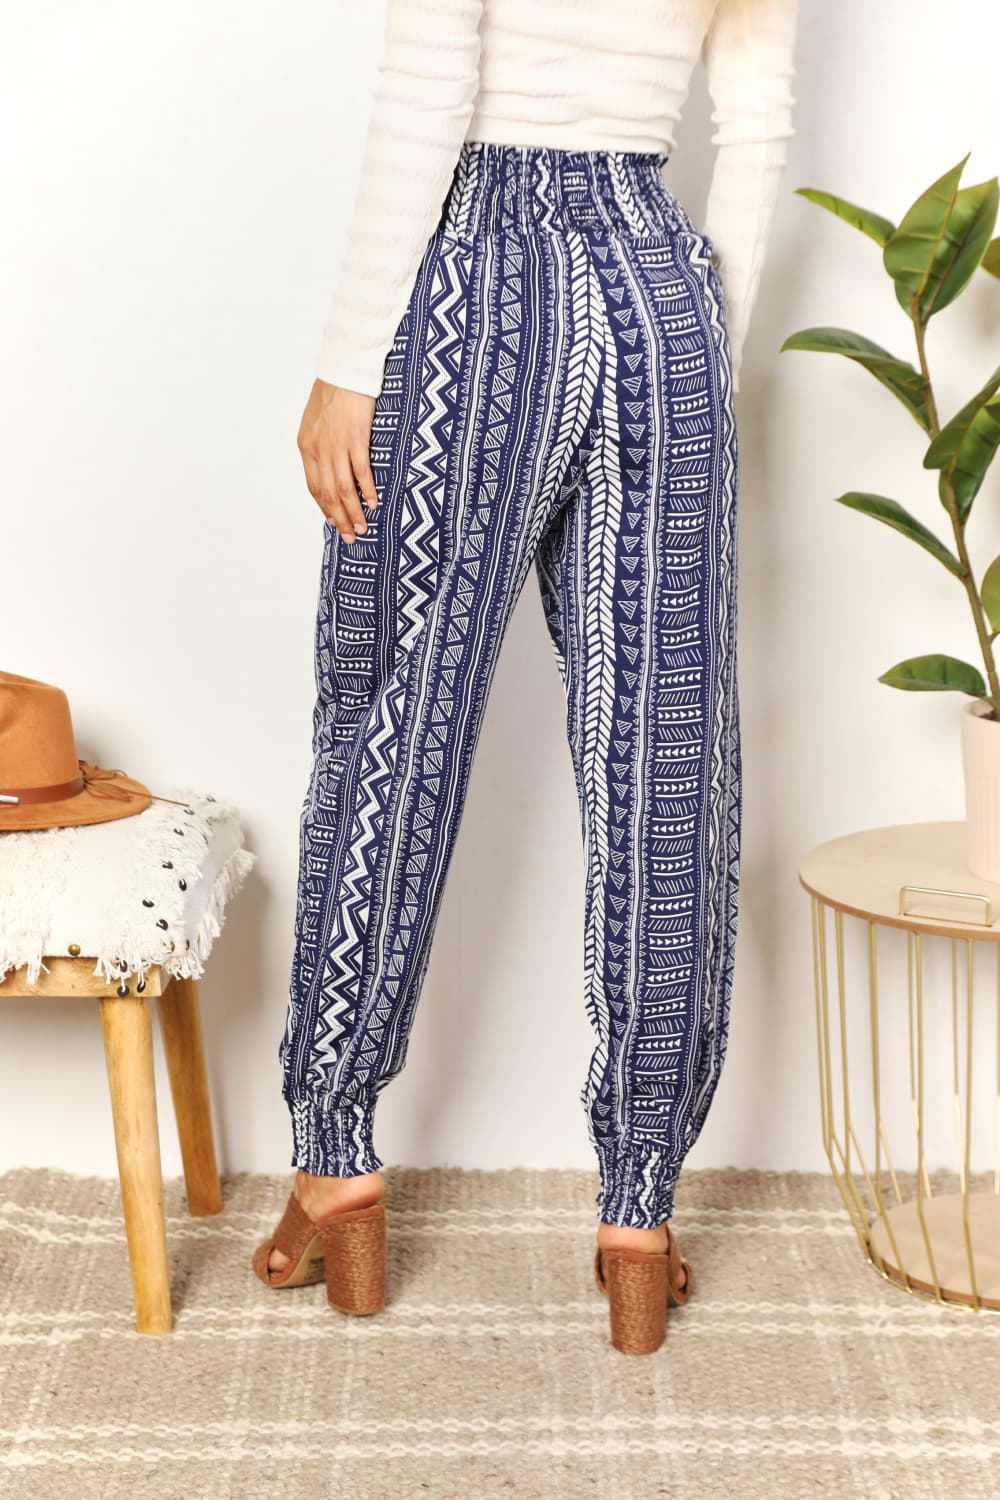 Double Take Geometric Print Tassel High-Rise Pants free shipping -Oh Em Gee Boutique